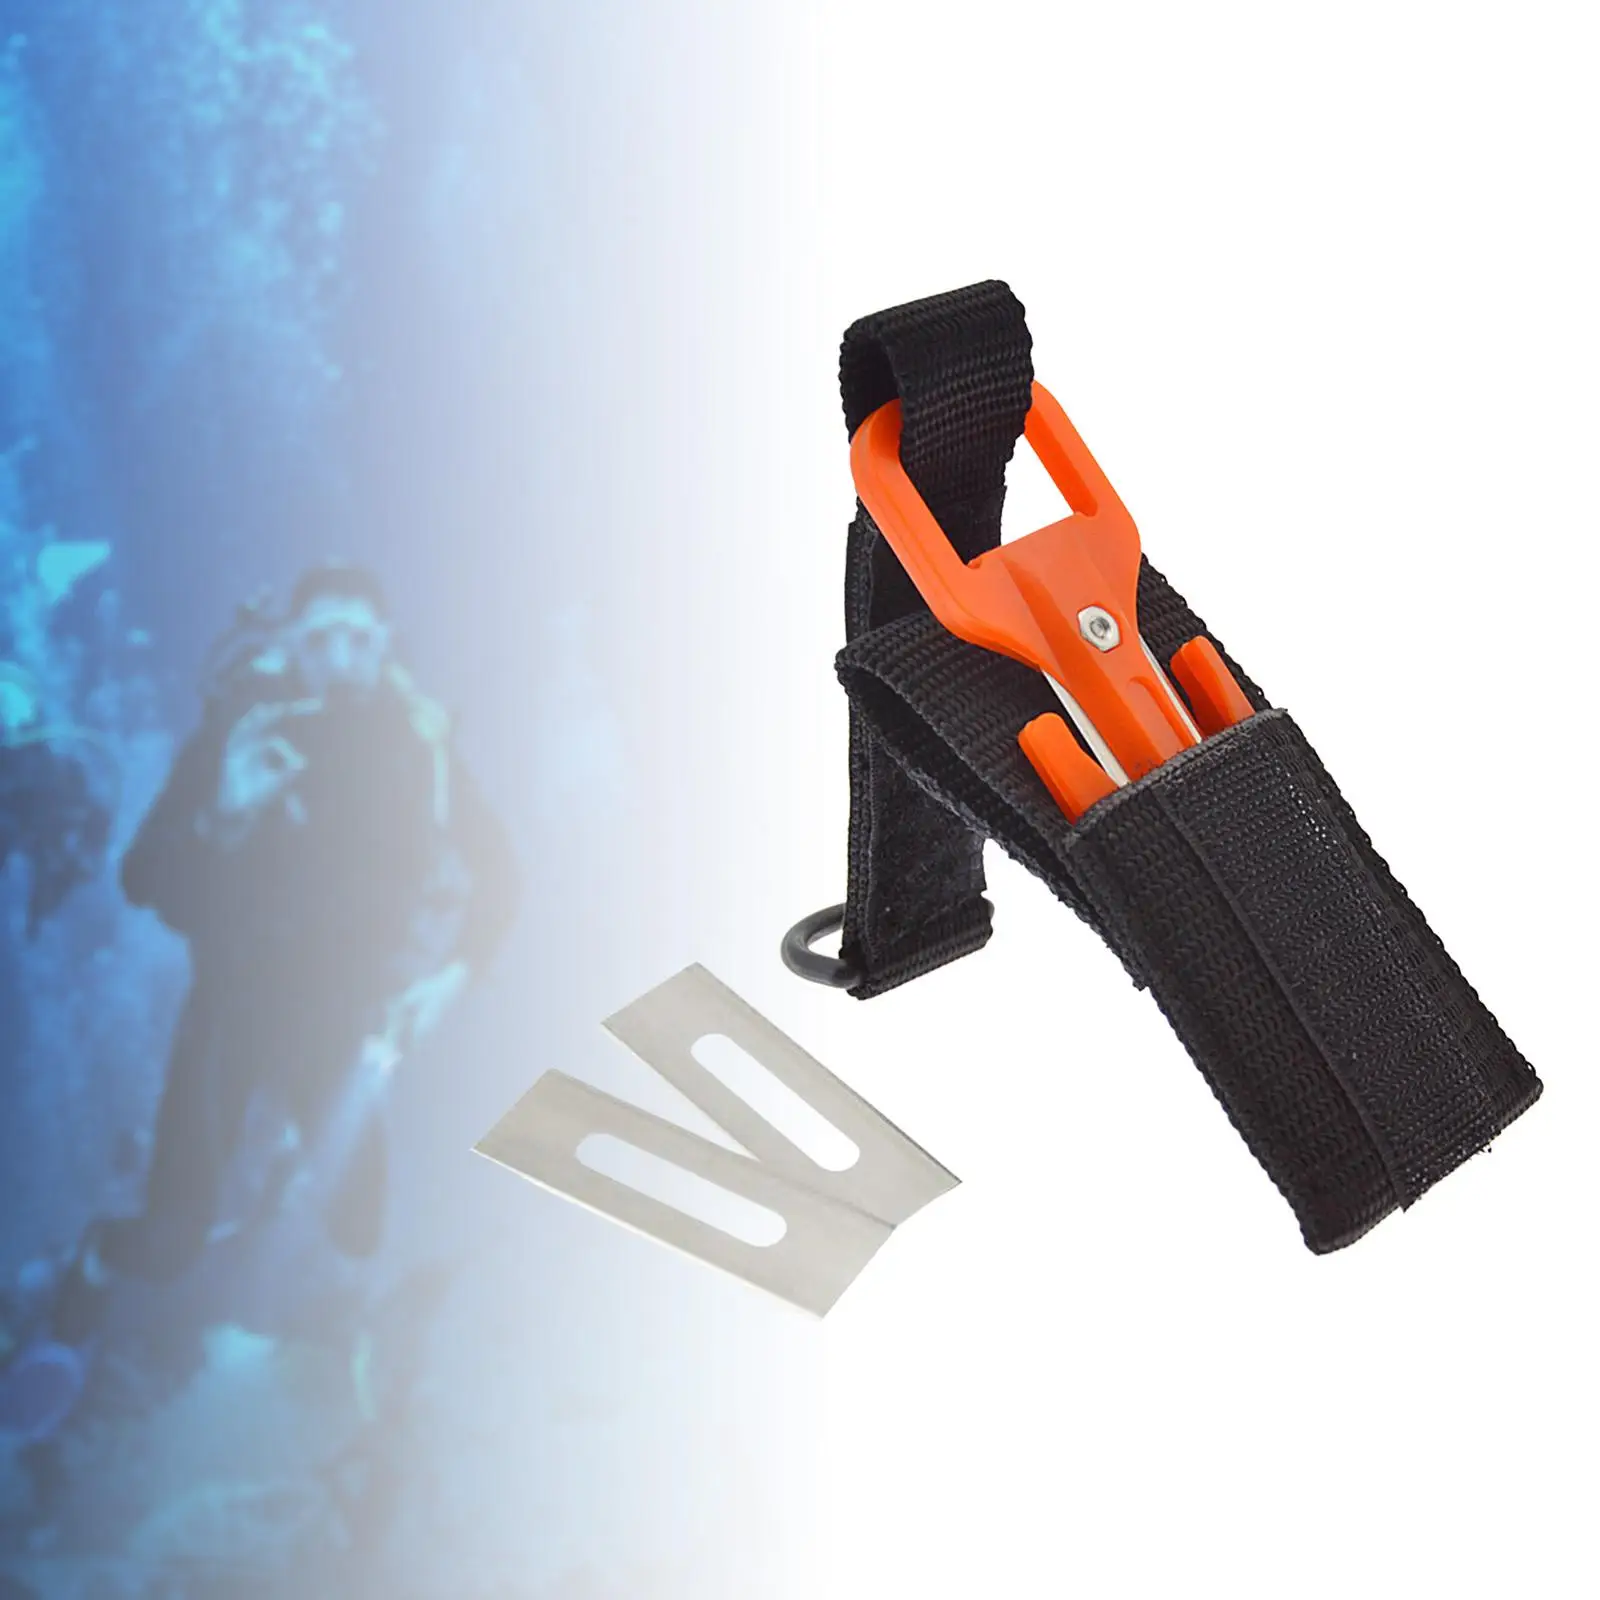 Scuba Dive Line Cutter Snorkeling Knives for Watersports Free Diving Diving